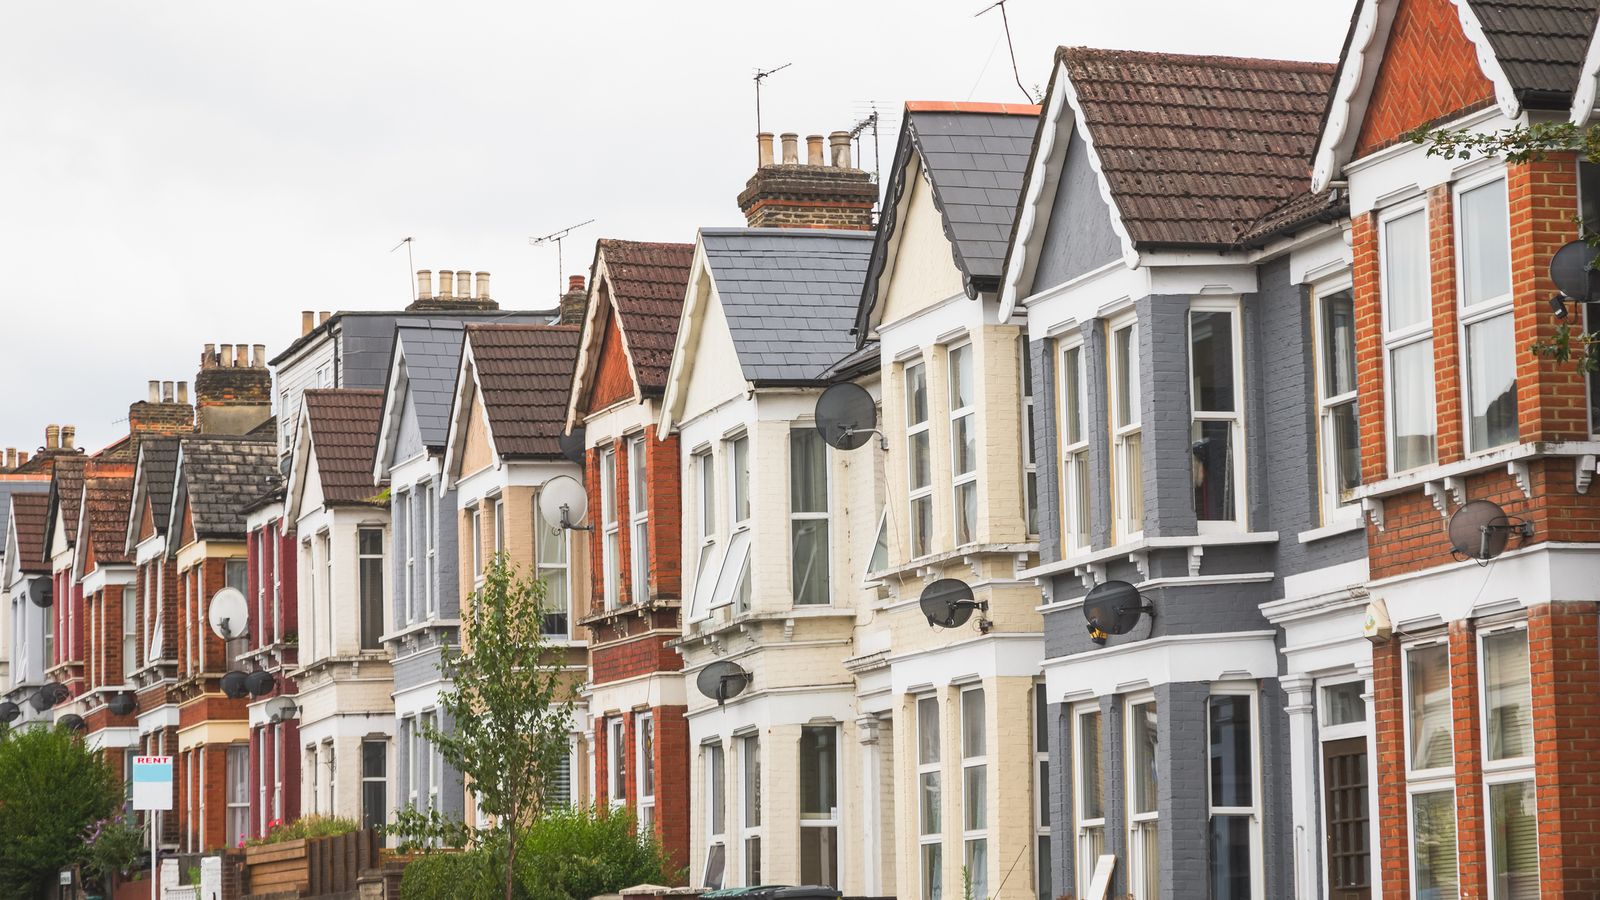 Government unveils 'once-in-a-generation' renting shake-up - including ban on 'no-fault' evictions